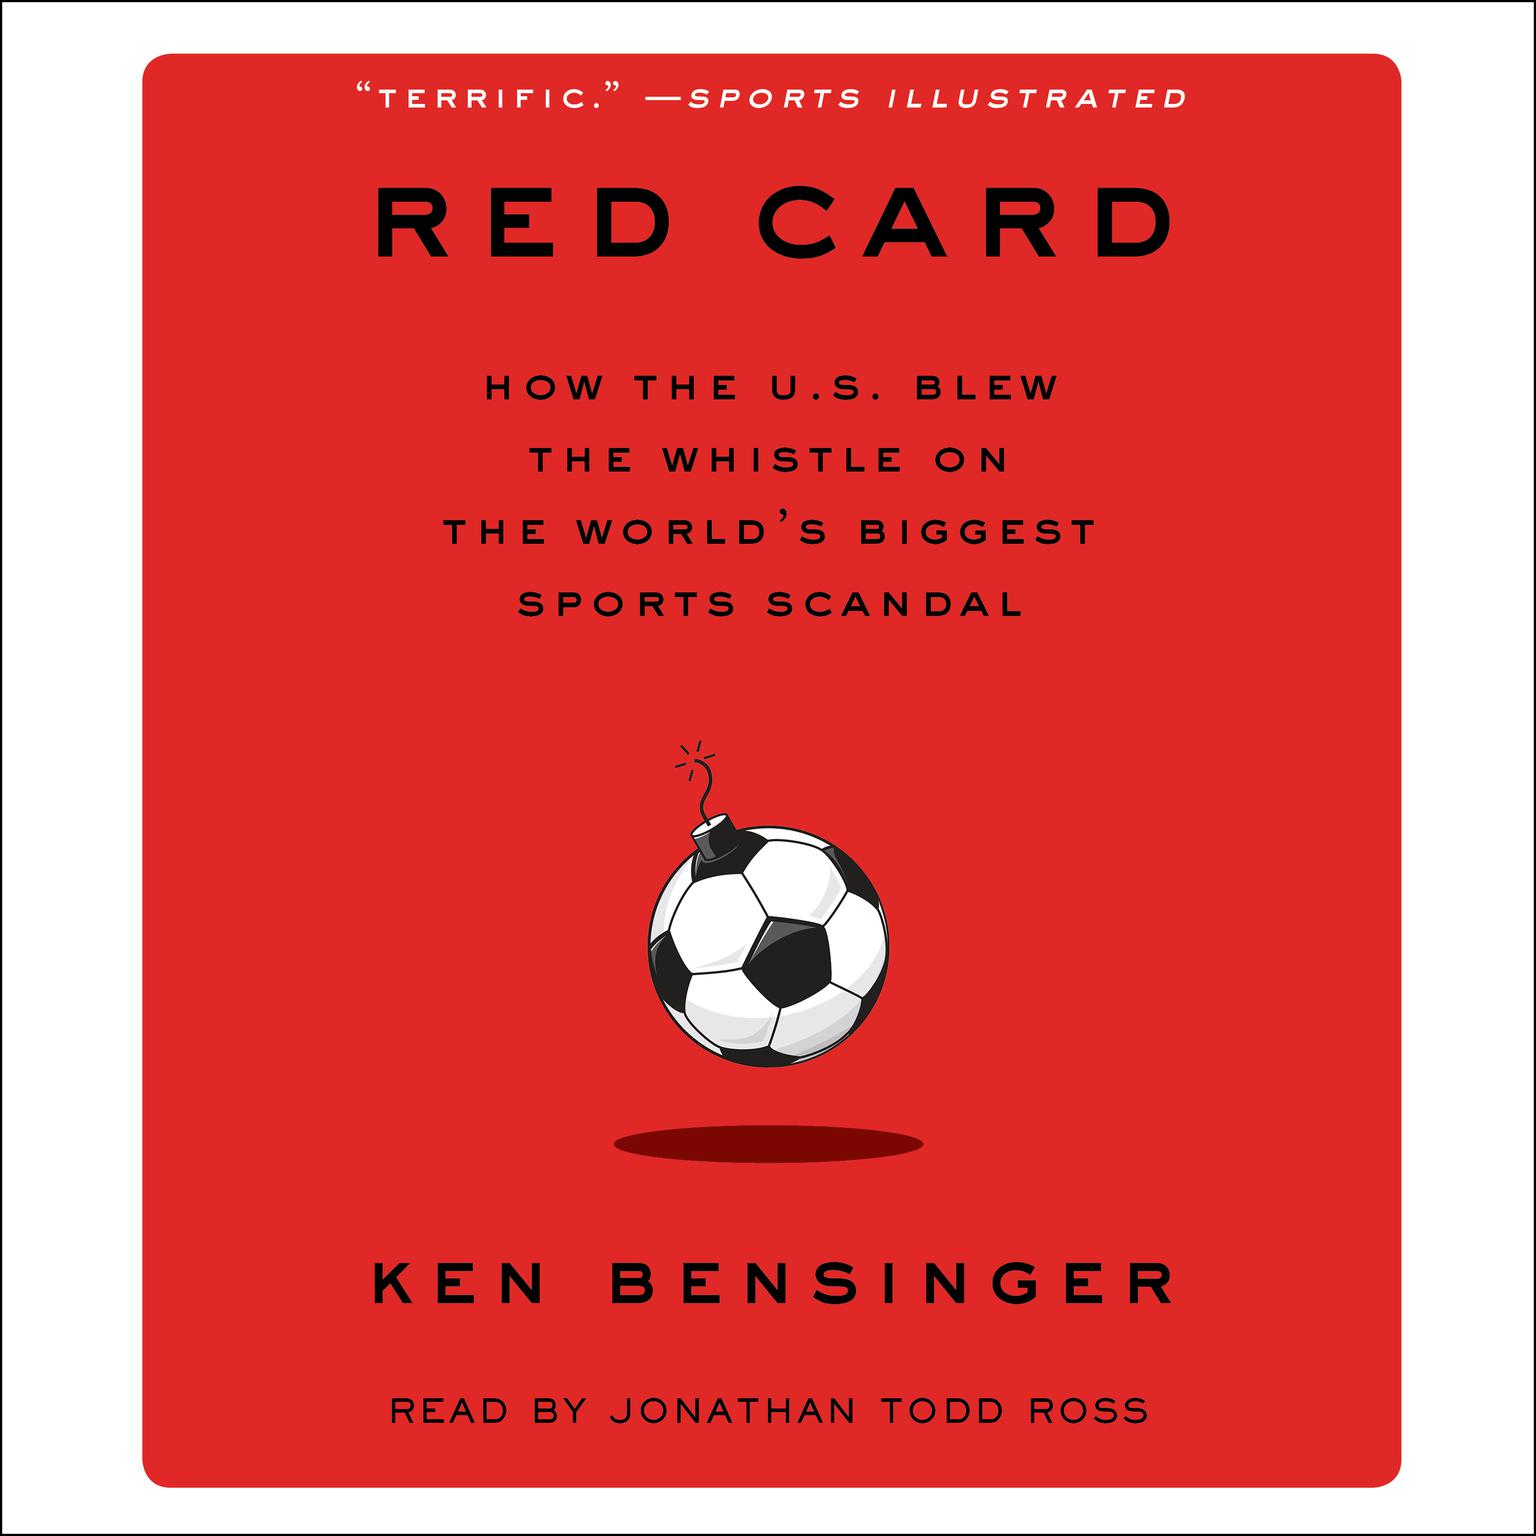 Red Card: How the U.S. Blew the Whistle on the Worlds Biggest Sports Scandal Audiobook, by Ken Bensinger